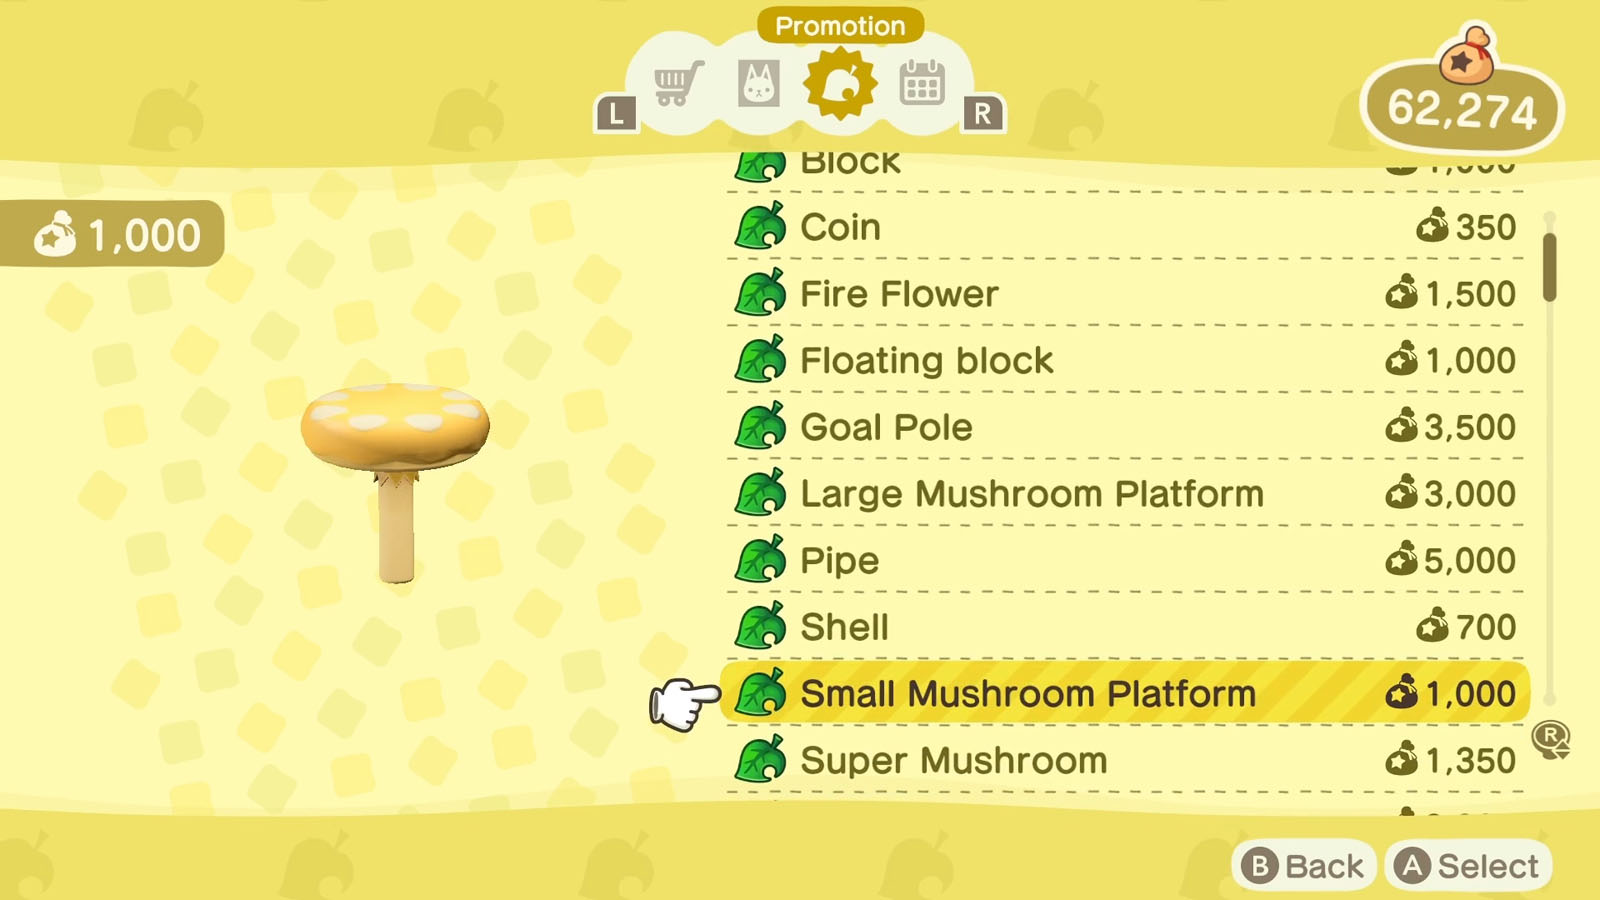 Super Mario Animal Crossing Update Items Complete List (Picture Guide)